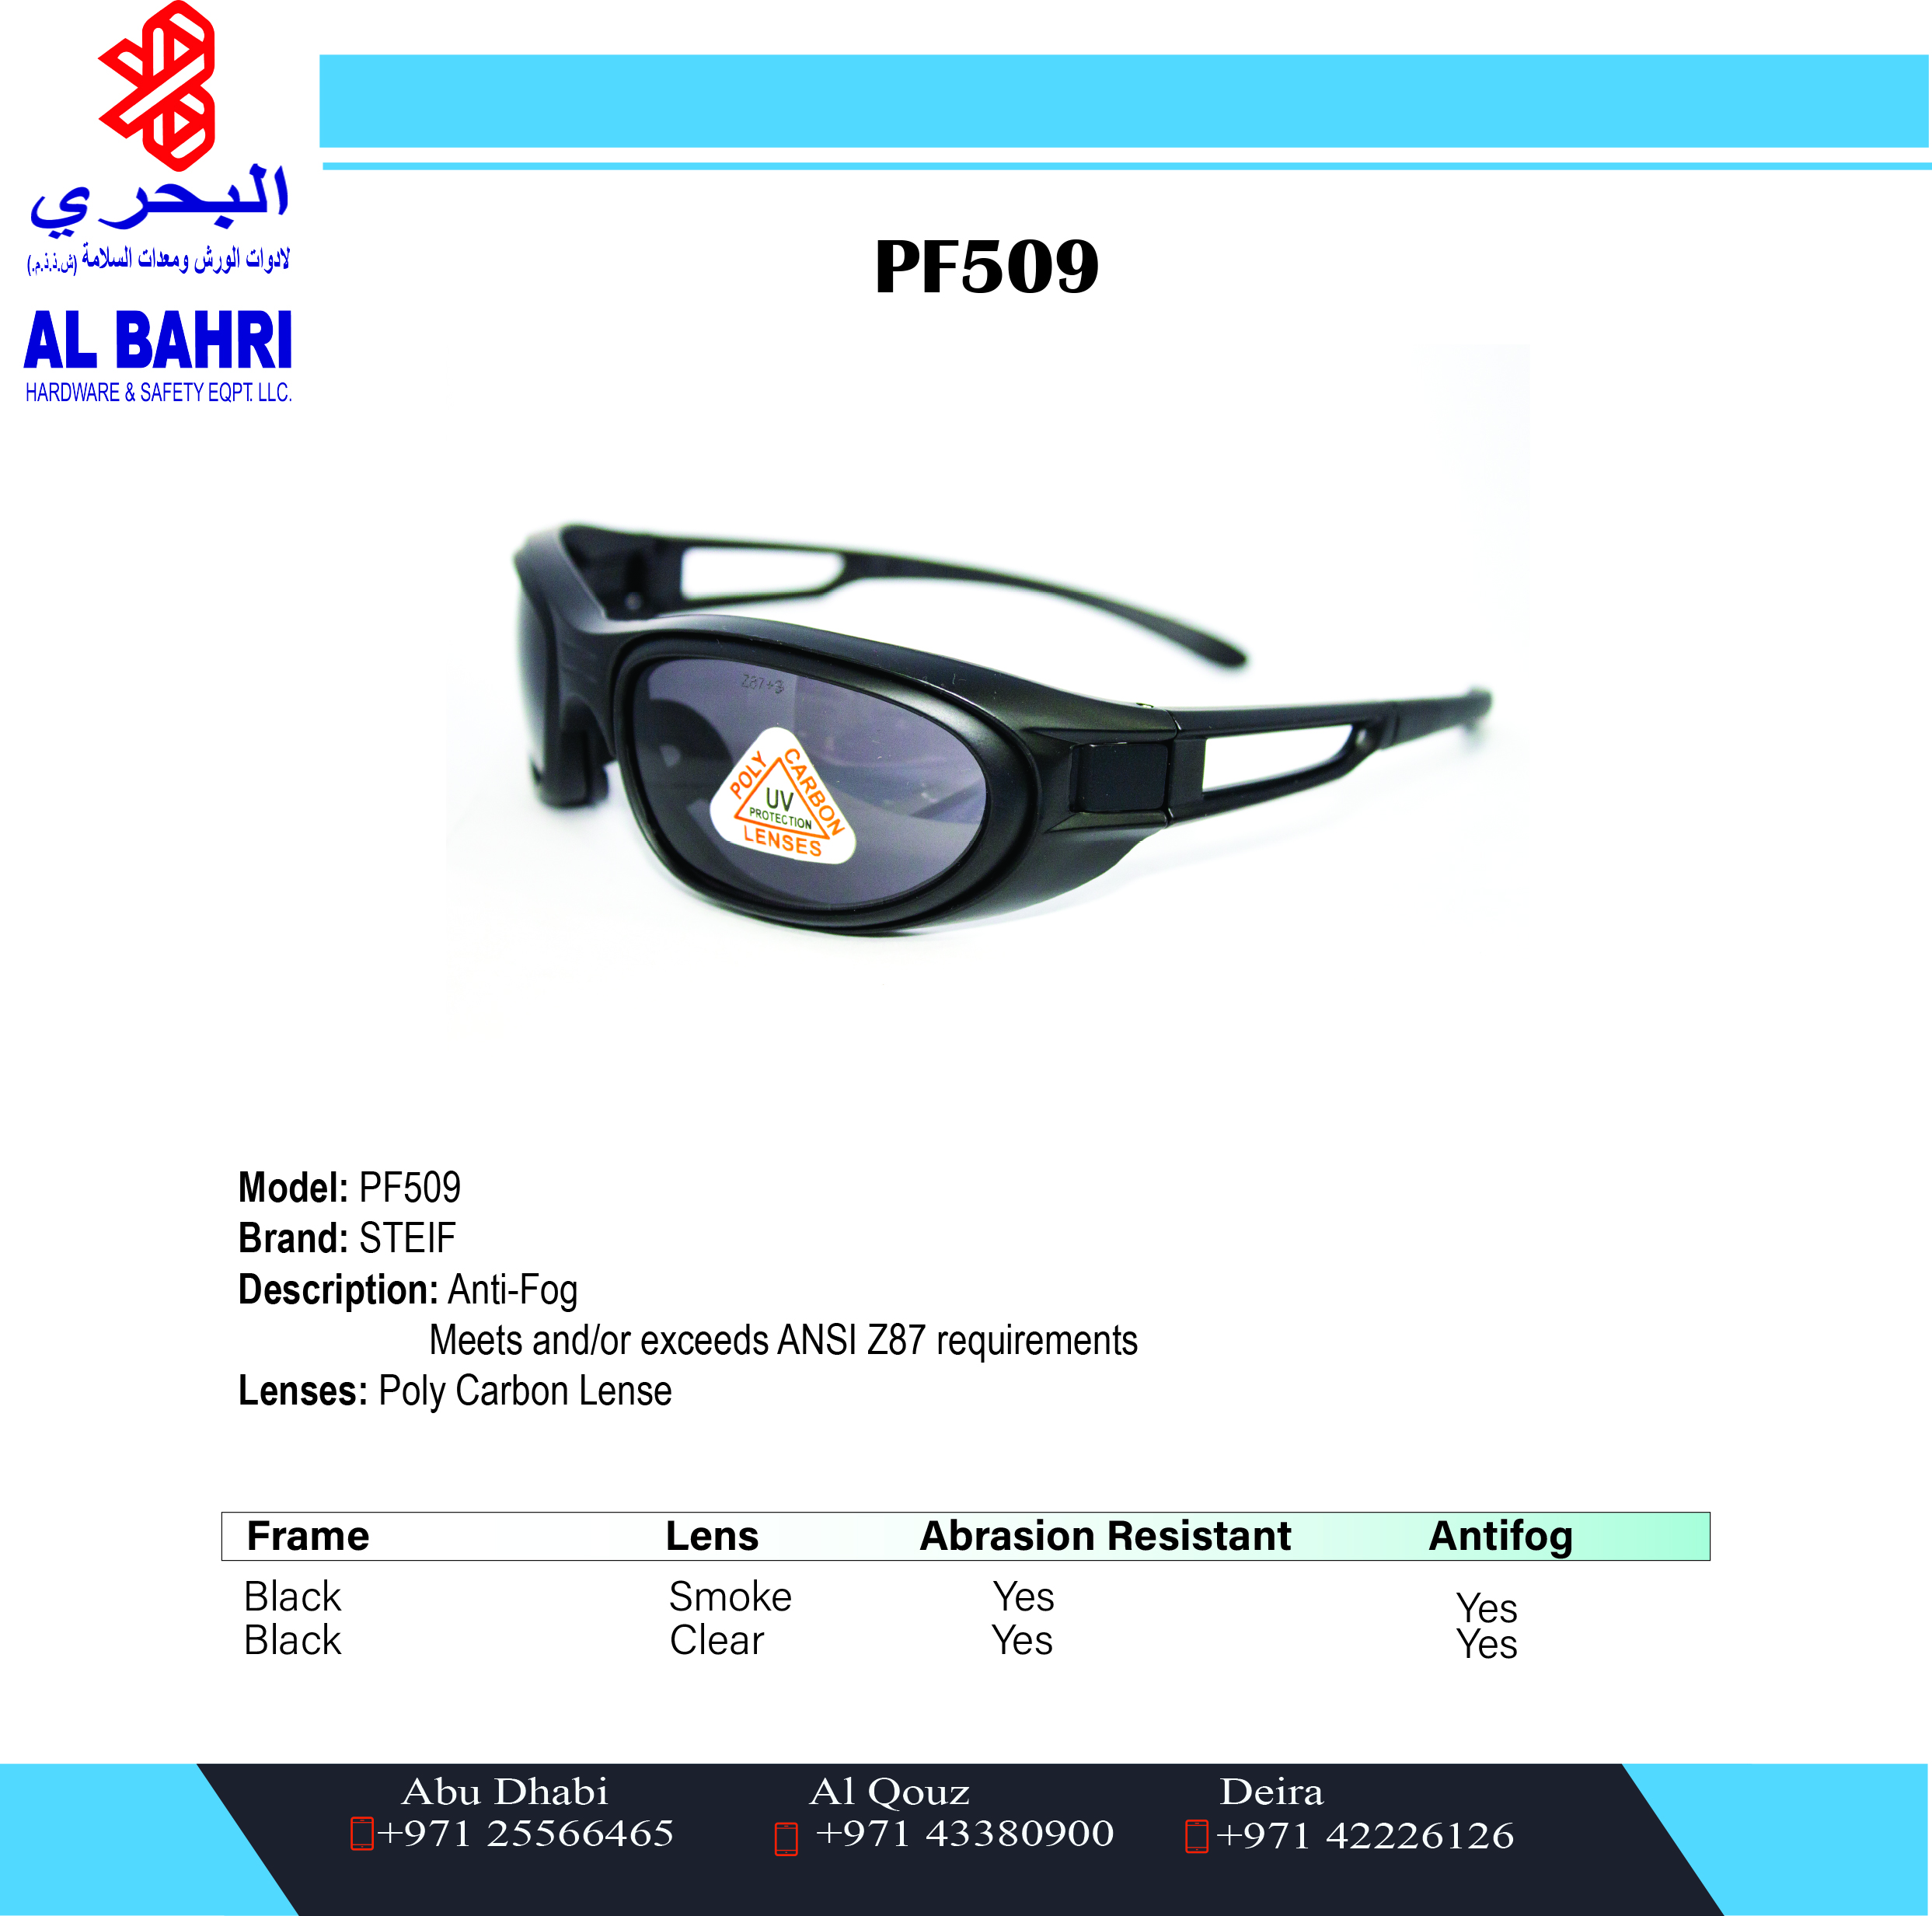 Spare Clear Lens for PF509 AF - Anti Fog Safety Glasses/Anti fog safety spectacles with clear lens and  smoke lens (STEIF PF509)